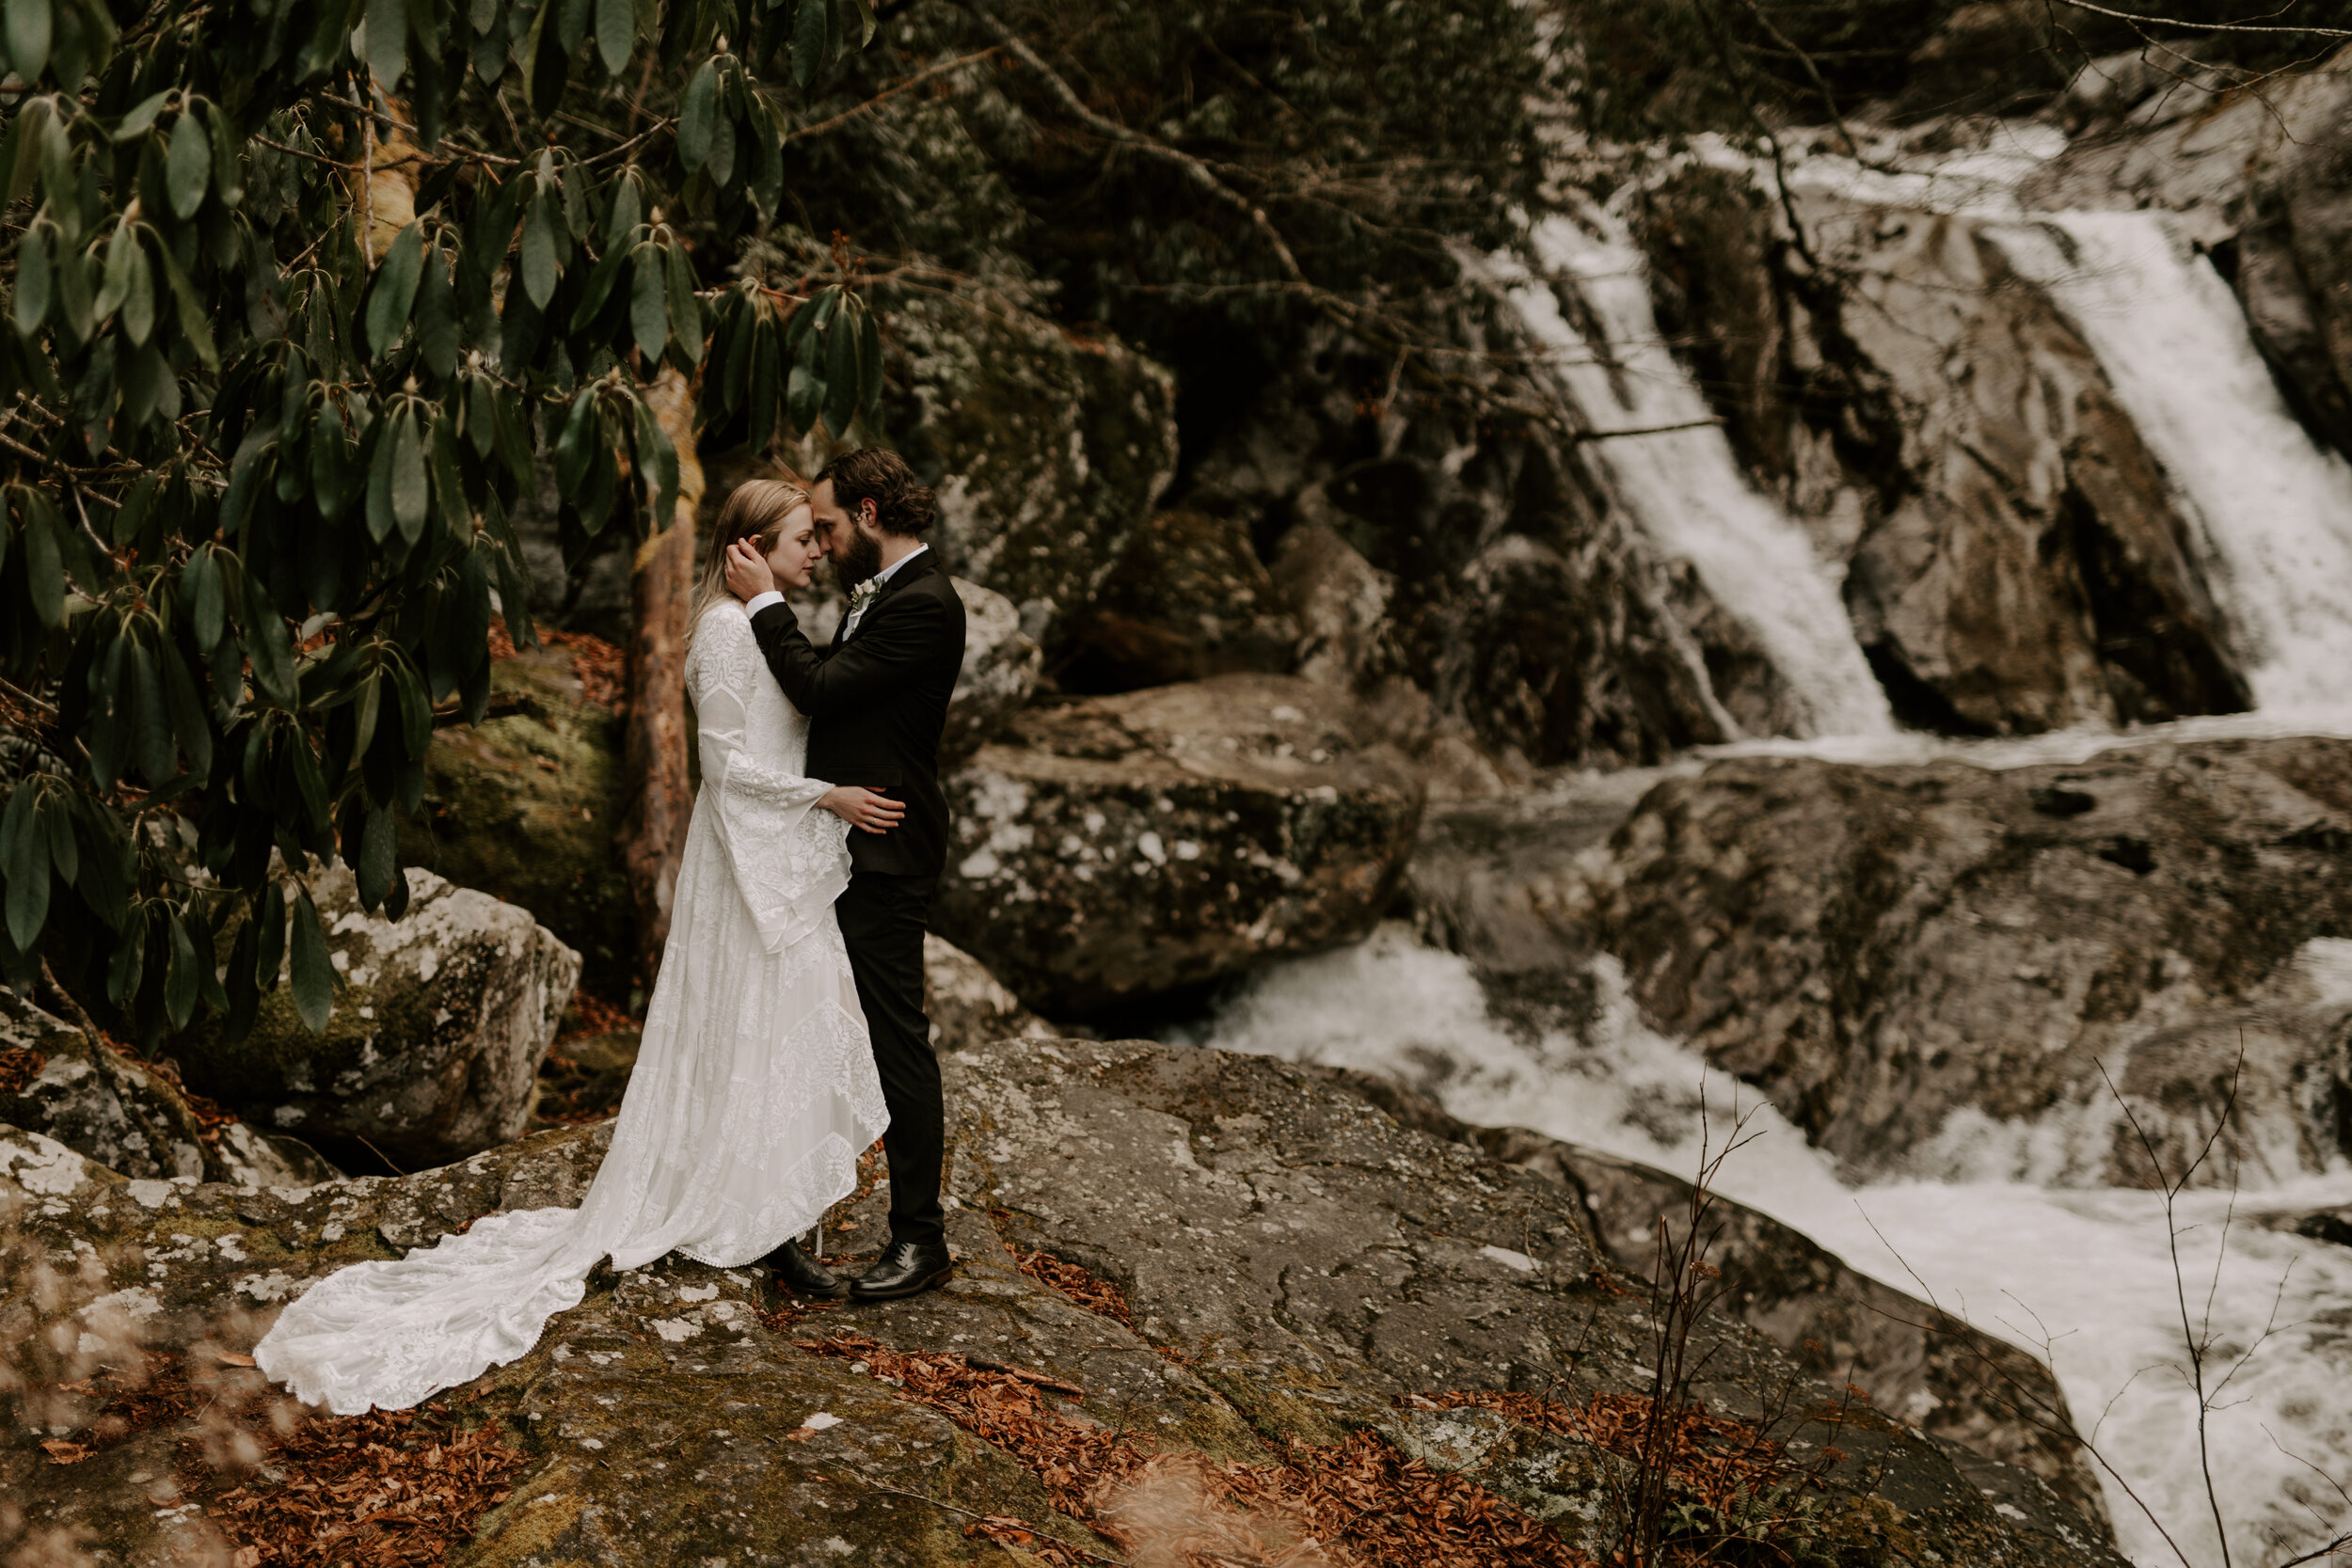   “I knew Paige &amp; Corey would be the type of couple that would make us feel so comfortable in front of the camera and allow us to focus on our one job - getting married! I could not recommend Paige &amp; Corey enough. They will exceed your expect